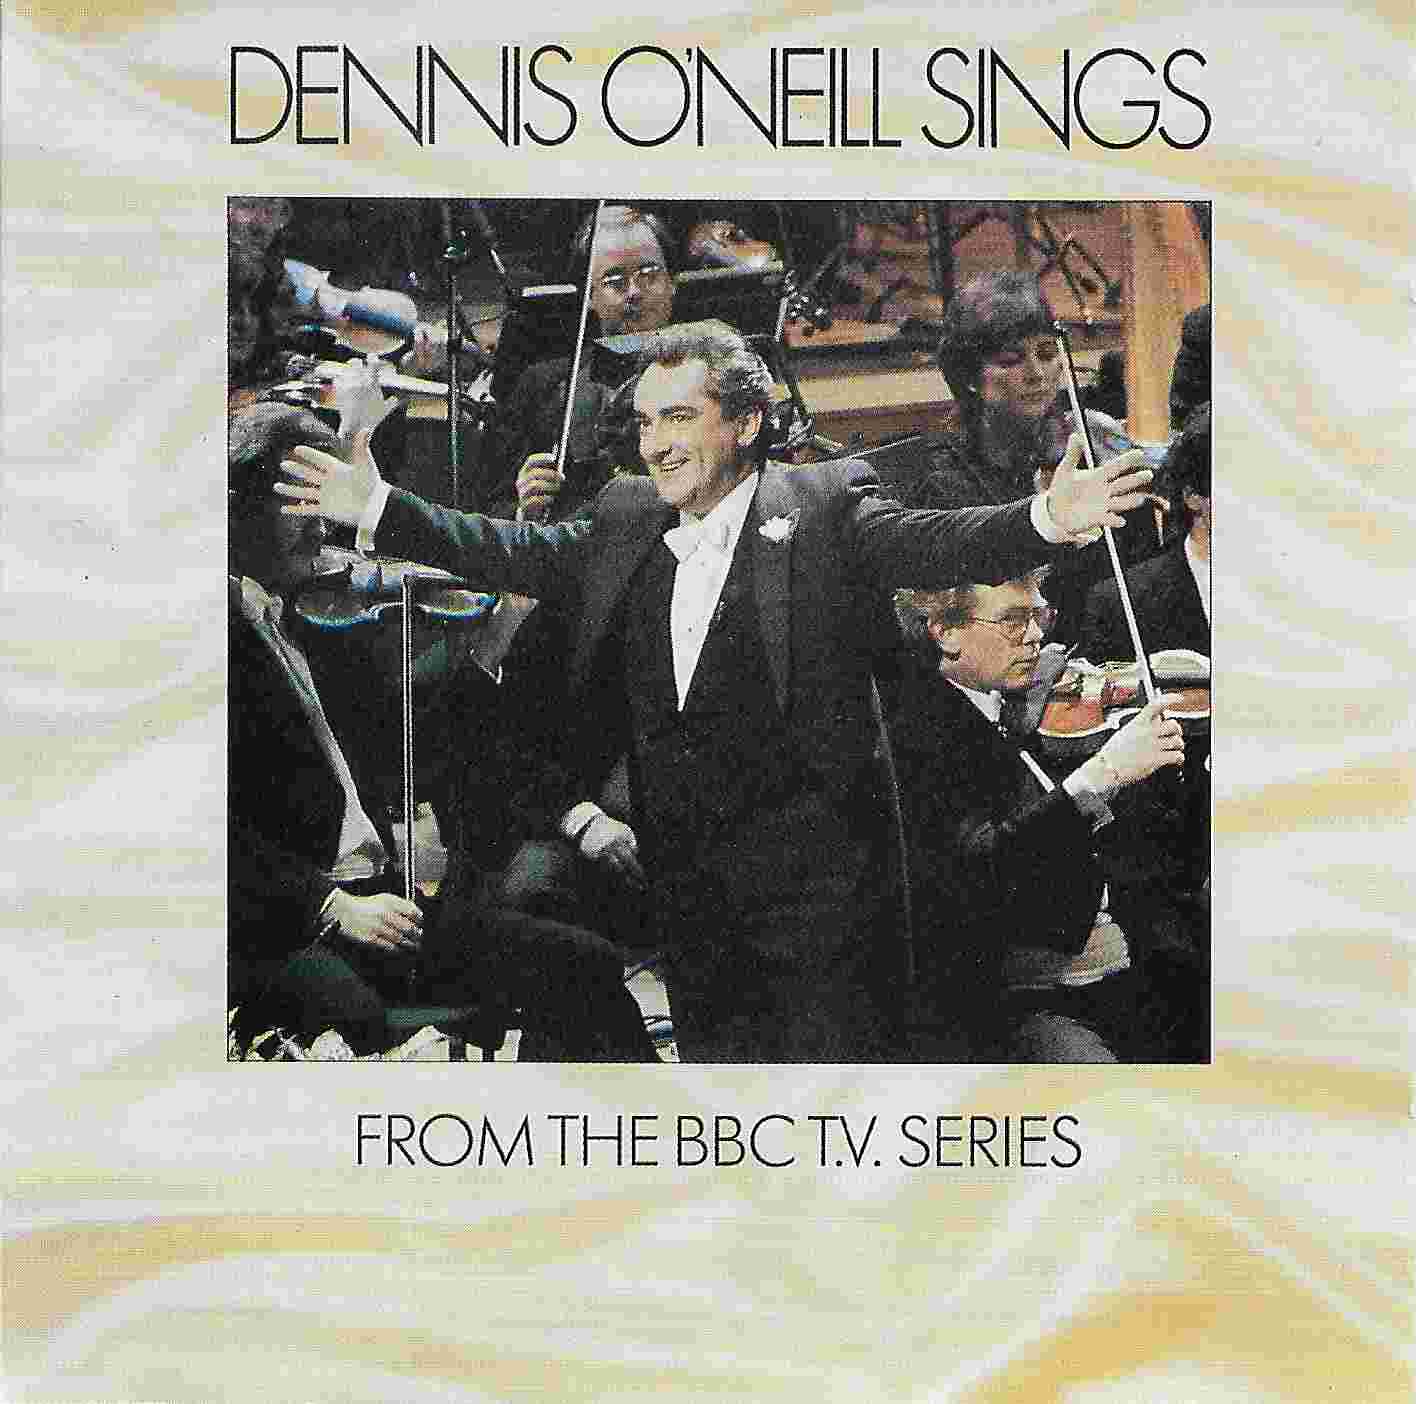 Picture of Dennis O'Neill sings by artist Dennis O'Neill  from the BBC cds - Records and Tapes library